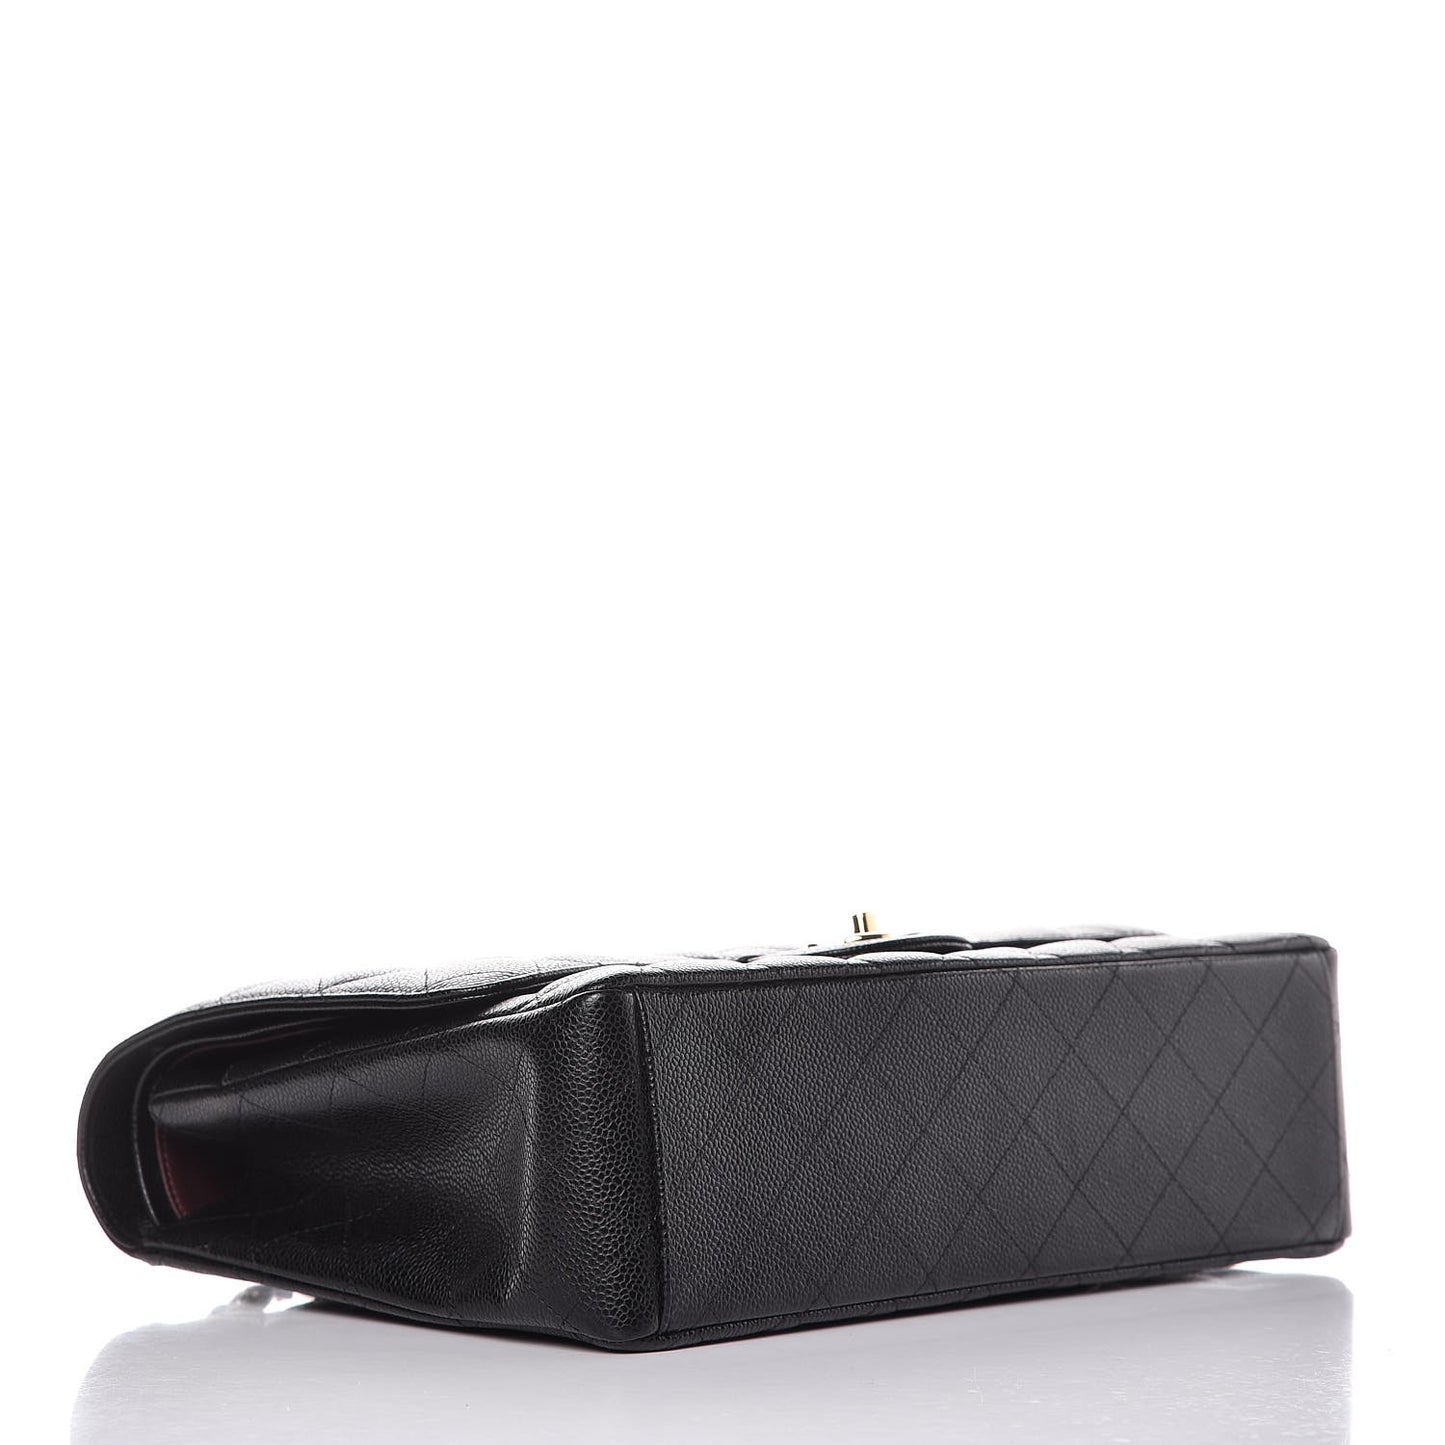 Caviar Quilted Maxi Double Flap Black